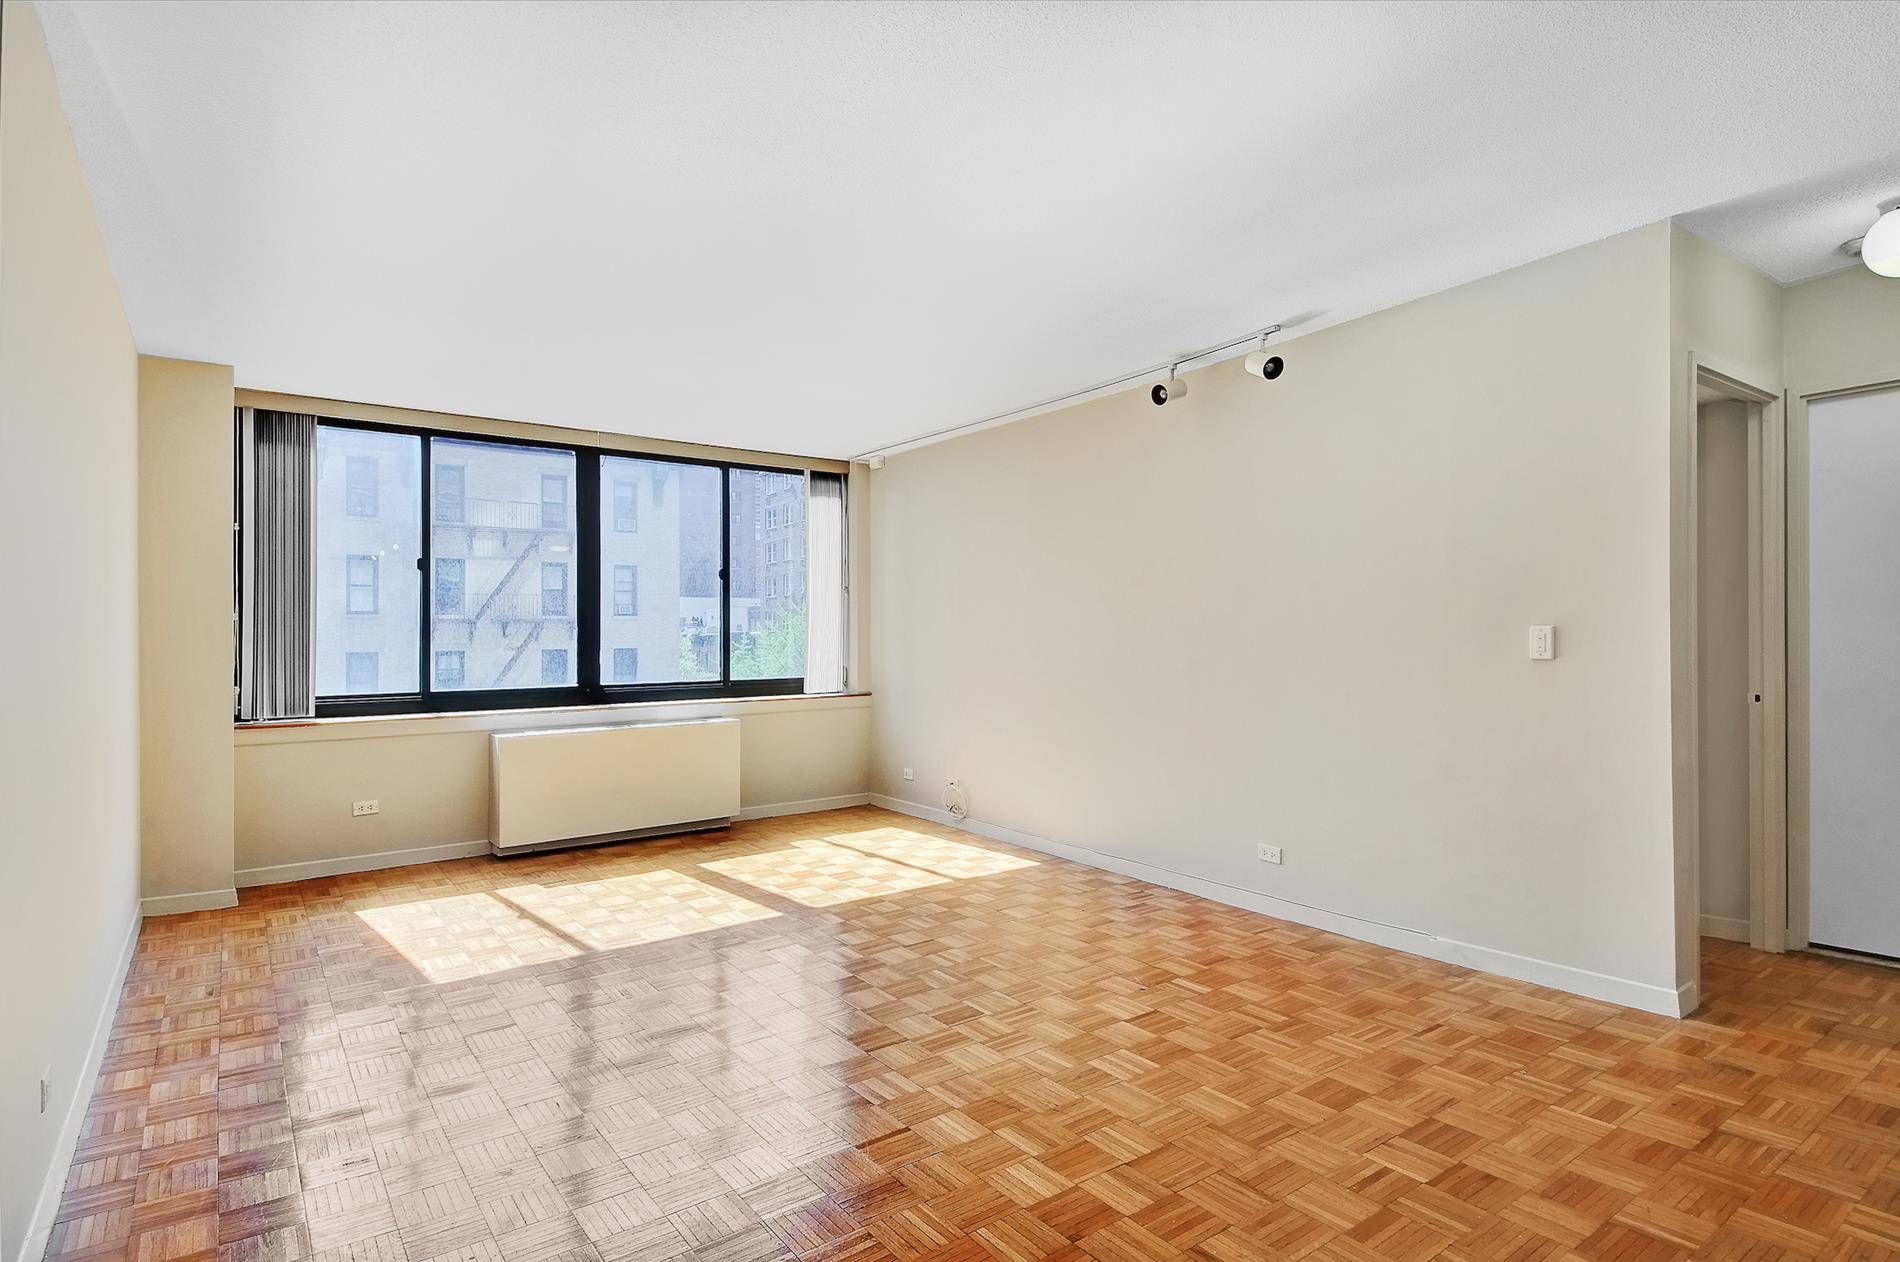 Welcome home to a large, East facing, One or Flex 2 Bedroom apartment located in the Bentley Condominium, a premier full service building located in Kips Bay.